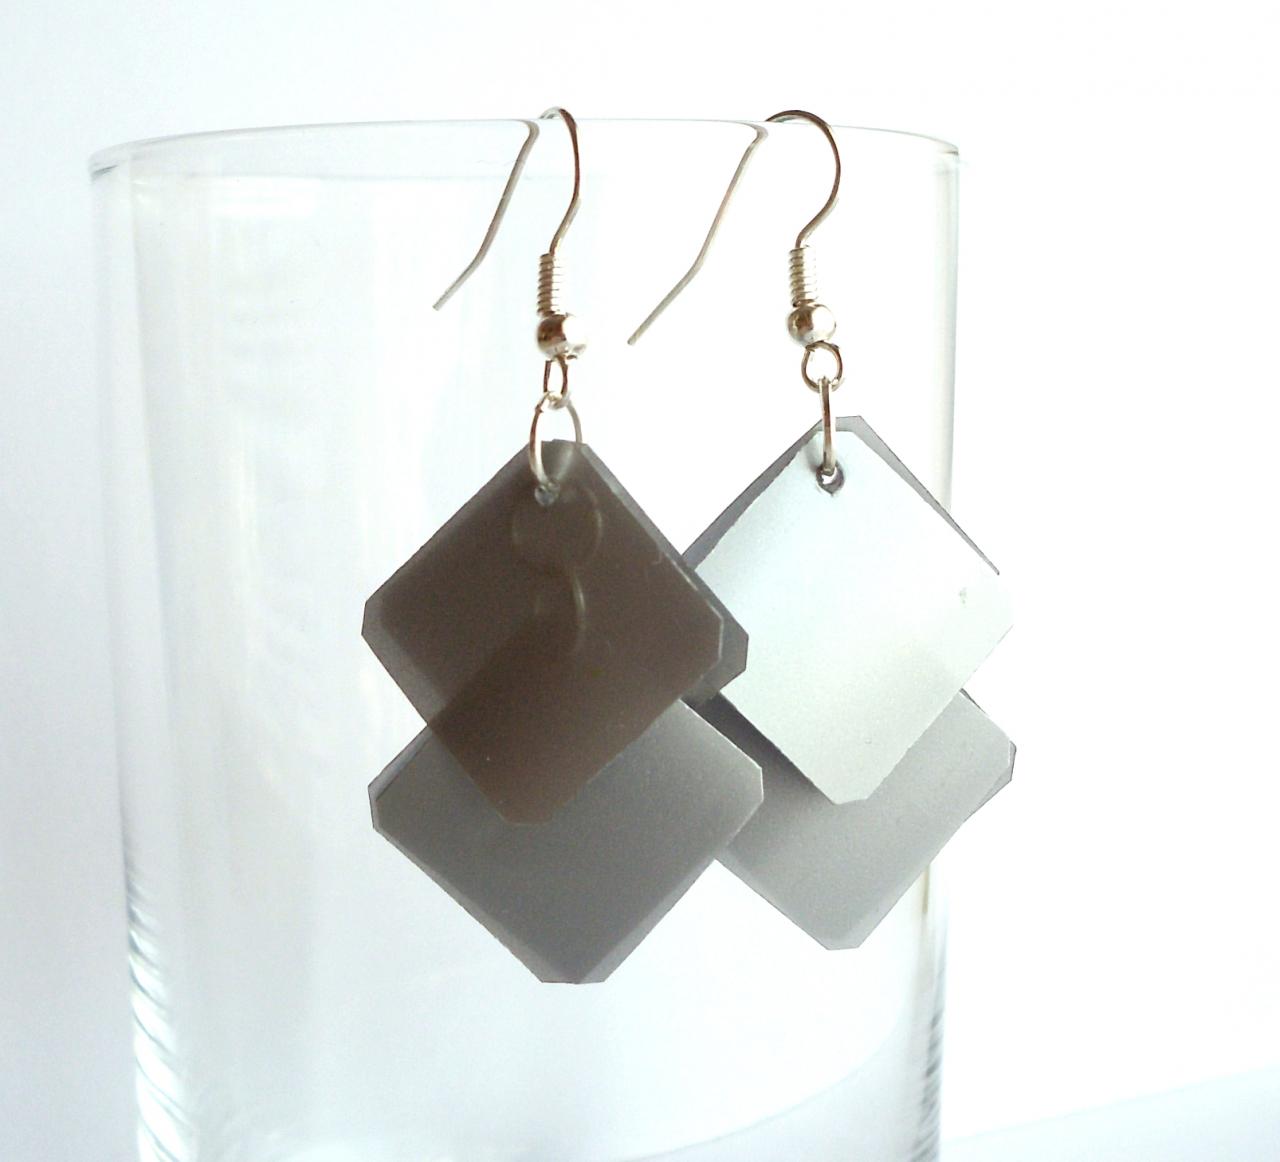 Silver Earrings Made Of Recycled Plastic Bottle - Upcycled Jewelry, Eco-friendly, Geometric, Squares, Minimalist, Modern